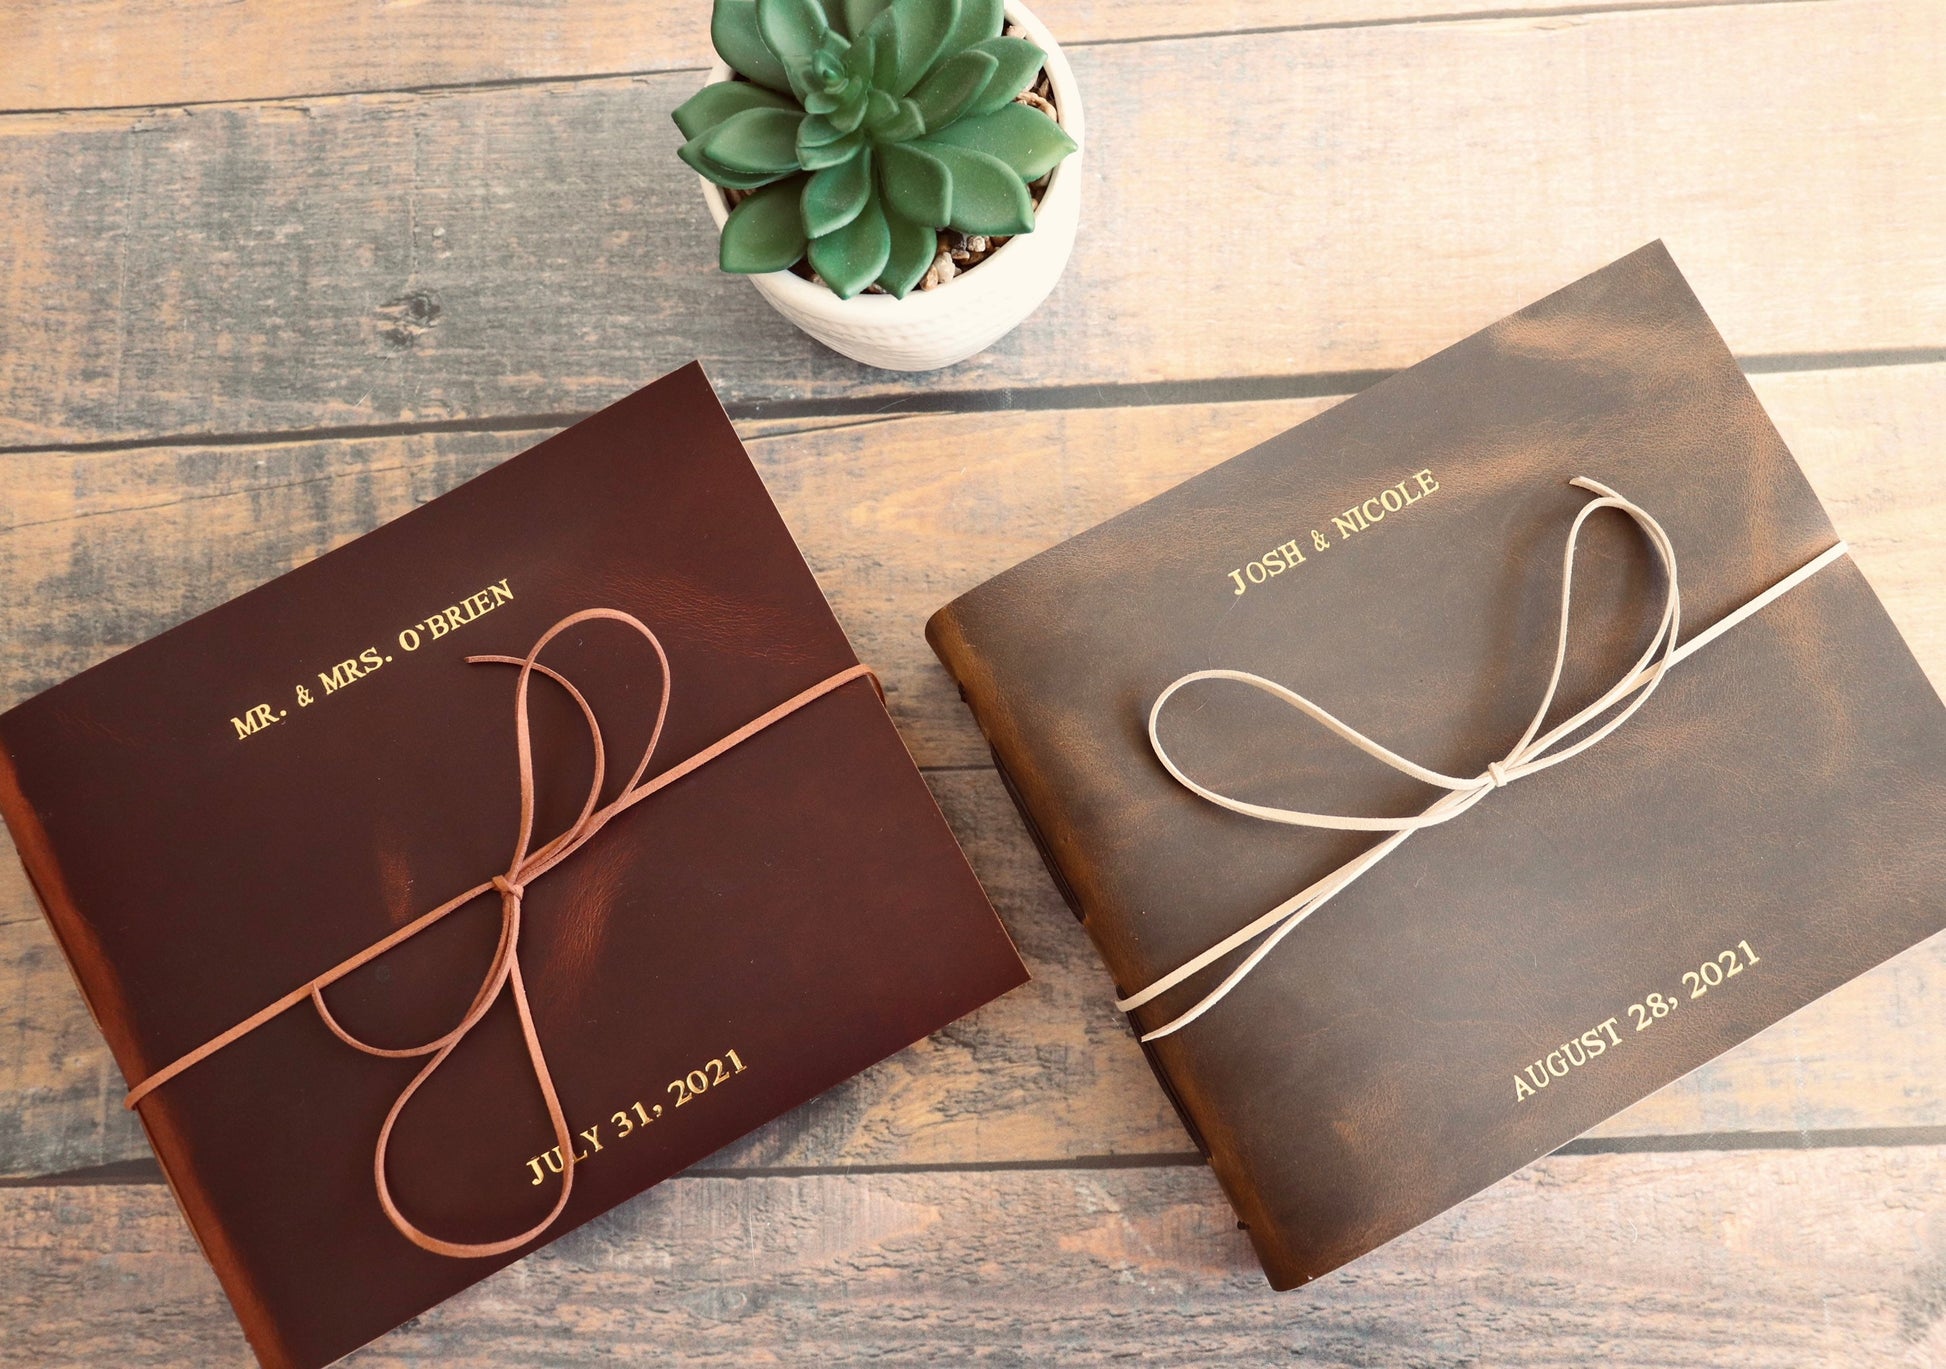 Personalized Wedding and Event Guest Book, Full Grain Leather Bound Journal, Rustic Wedding Keepsake Gift, Premium Photo Scrapbook Guest Log